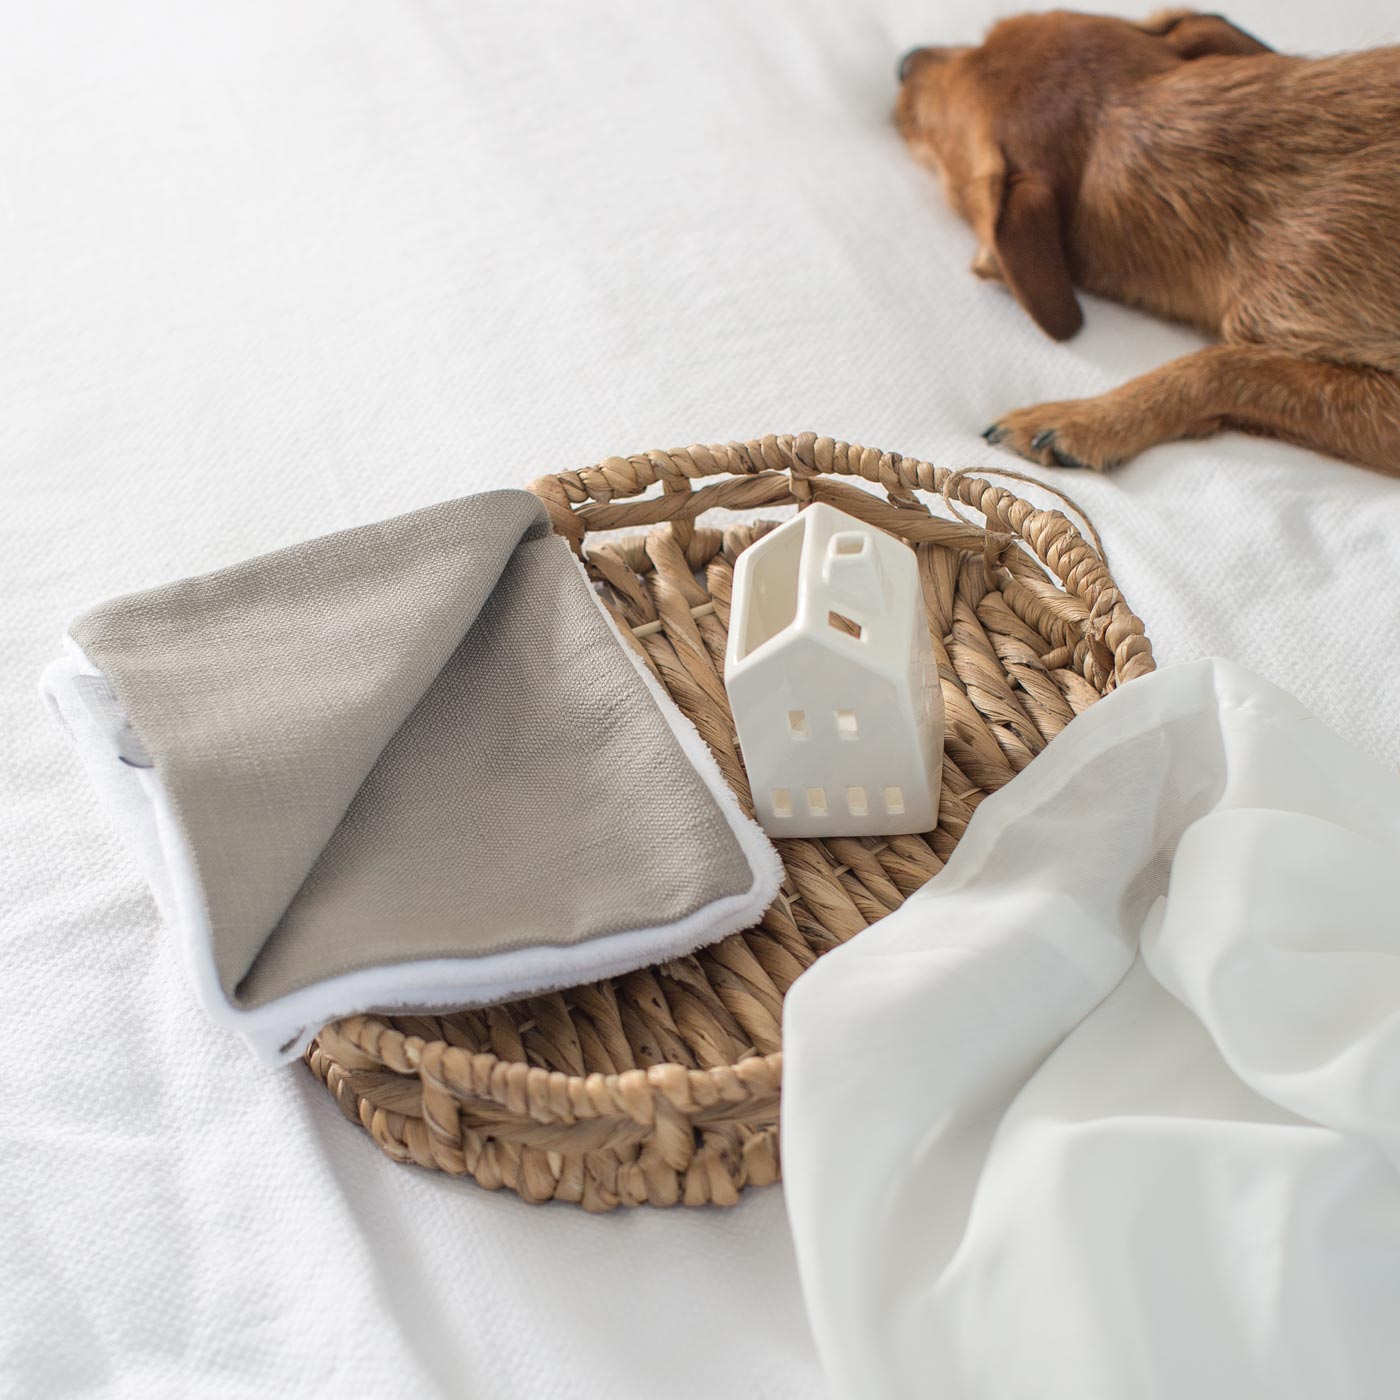 [colour:savanna stone] Luxury Savanna Pet Blanket collection, In Stunning Savanna Stone. The Perfect Blanket For Dogs, Available at Lords & Labradors